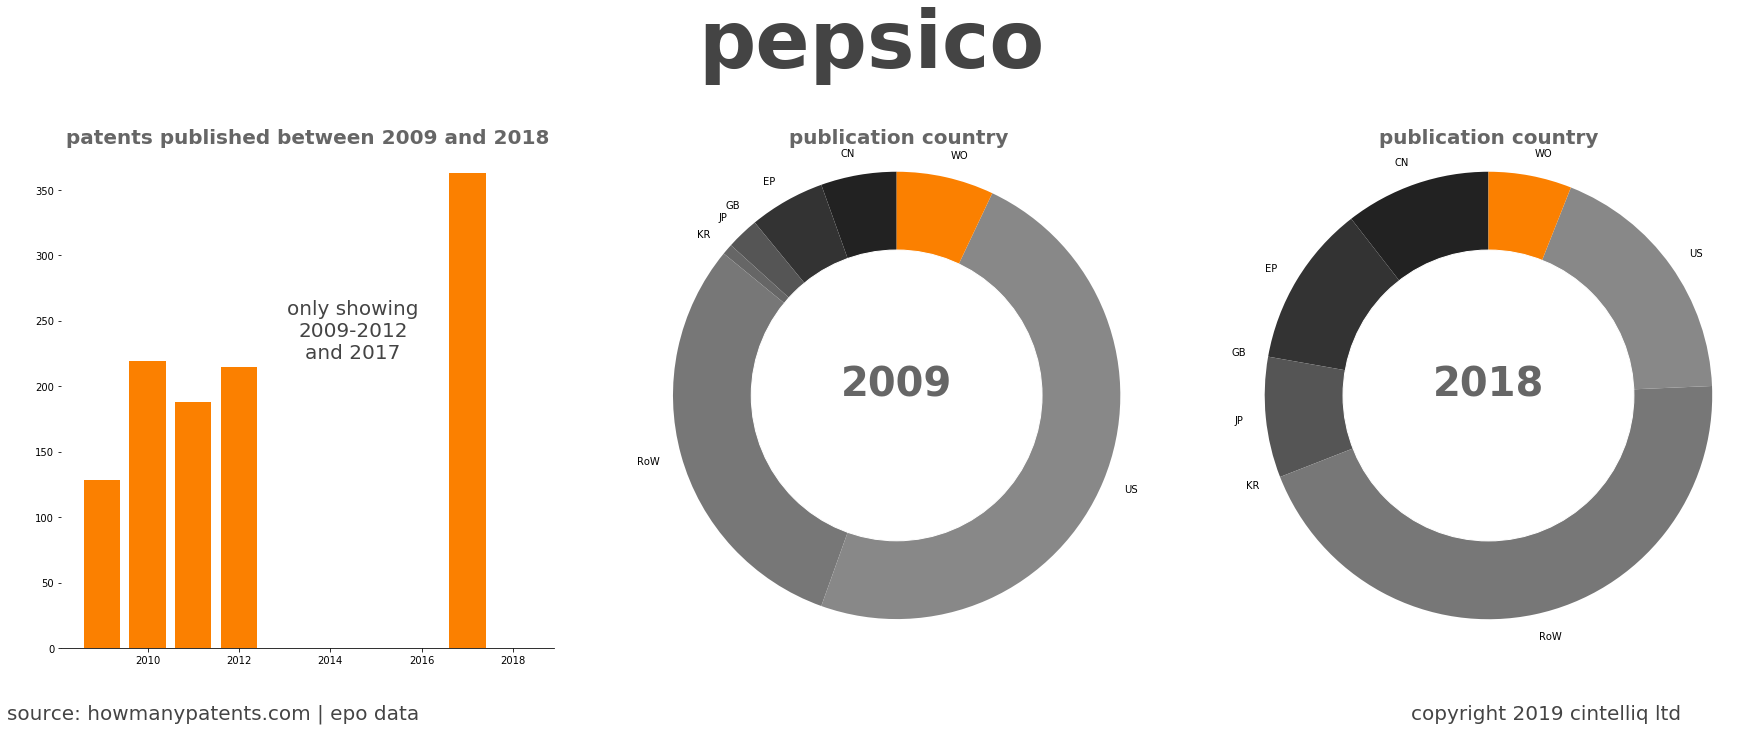 summary of patents for Pepsico